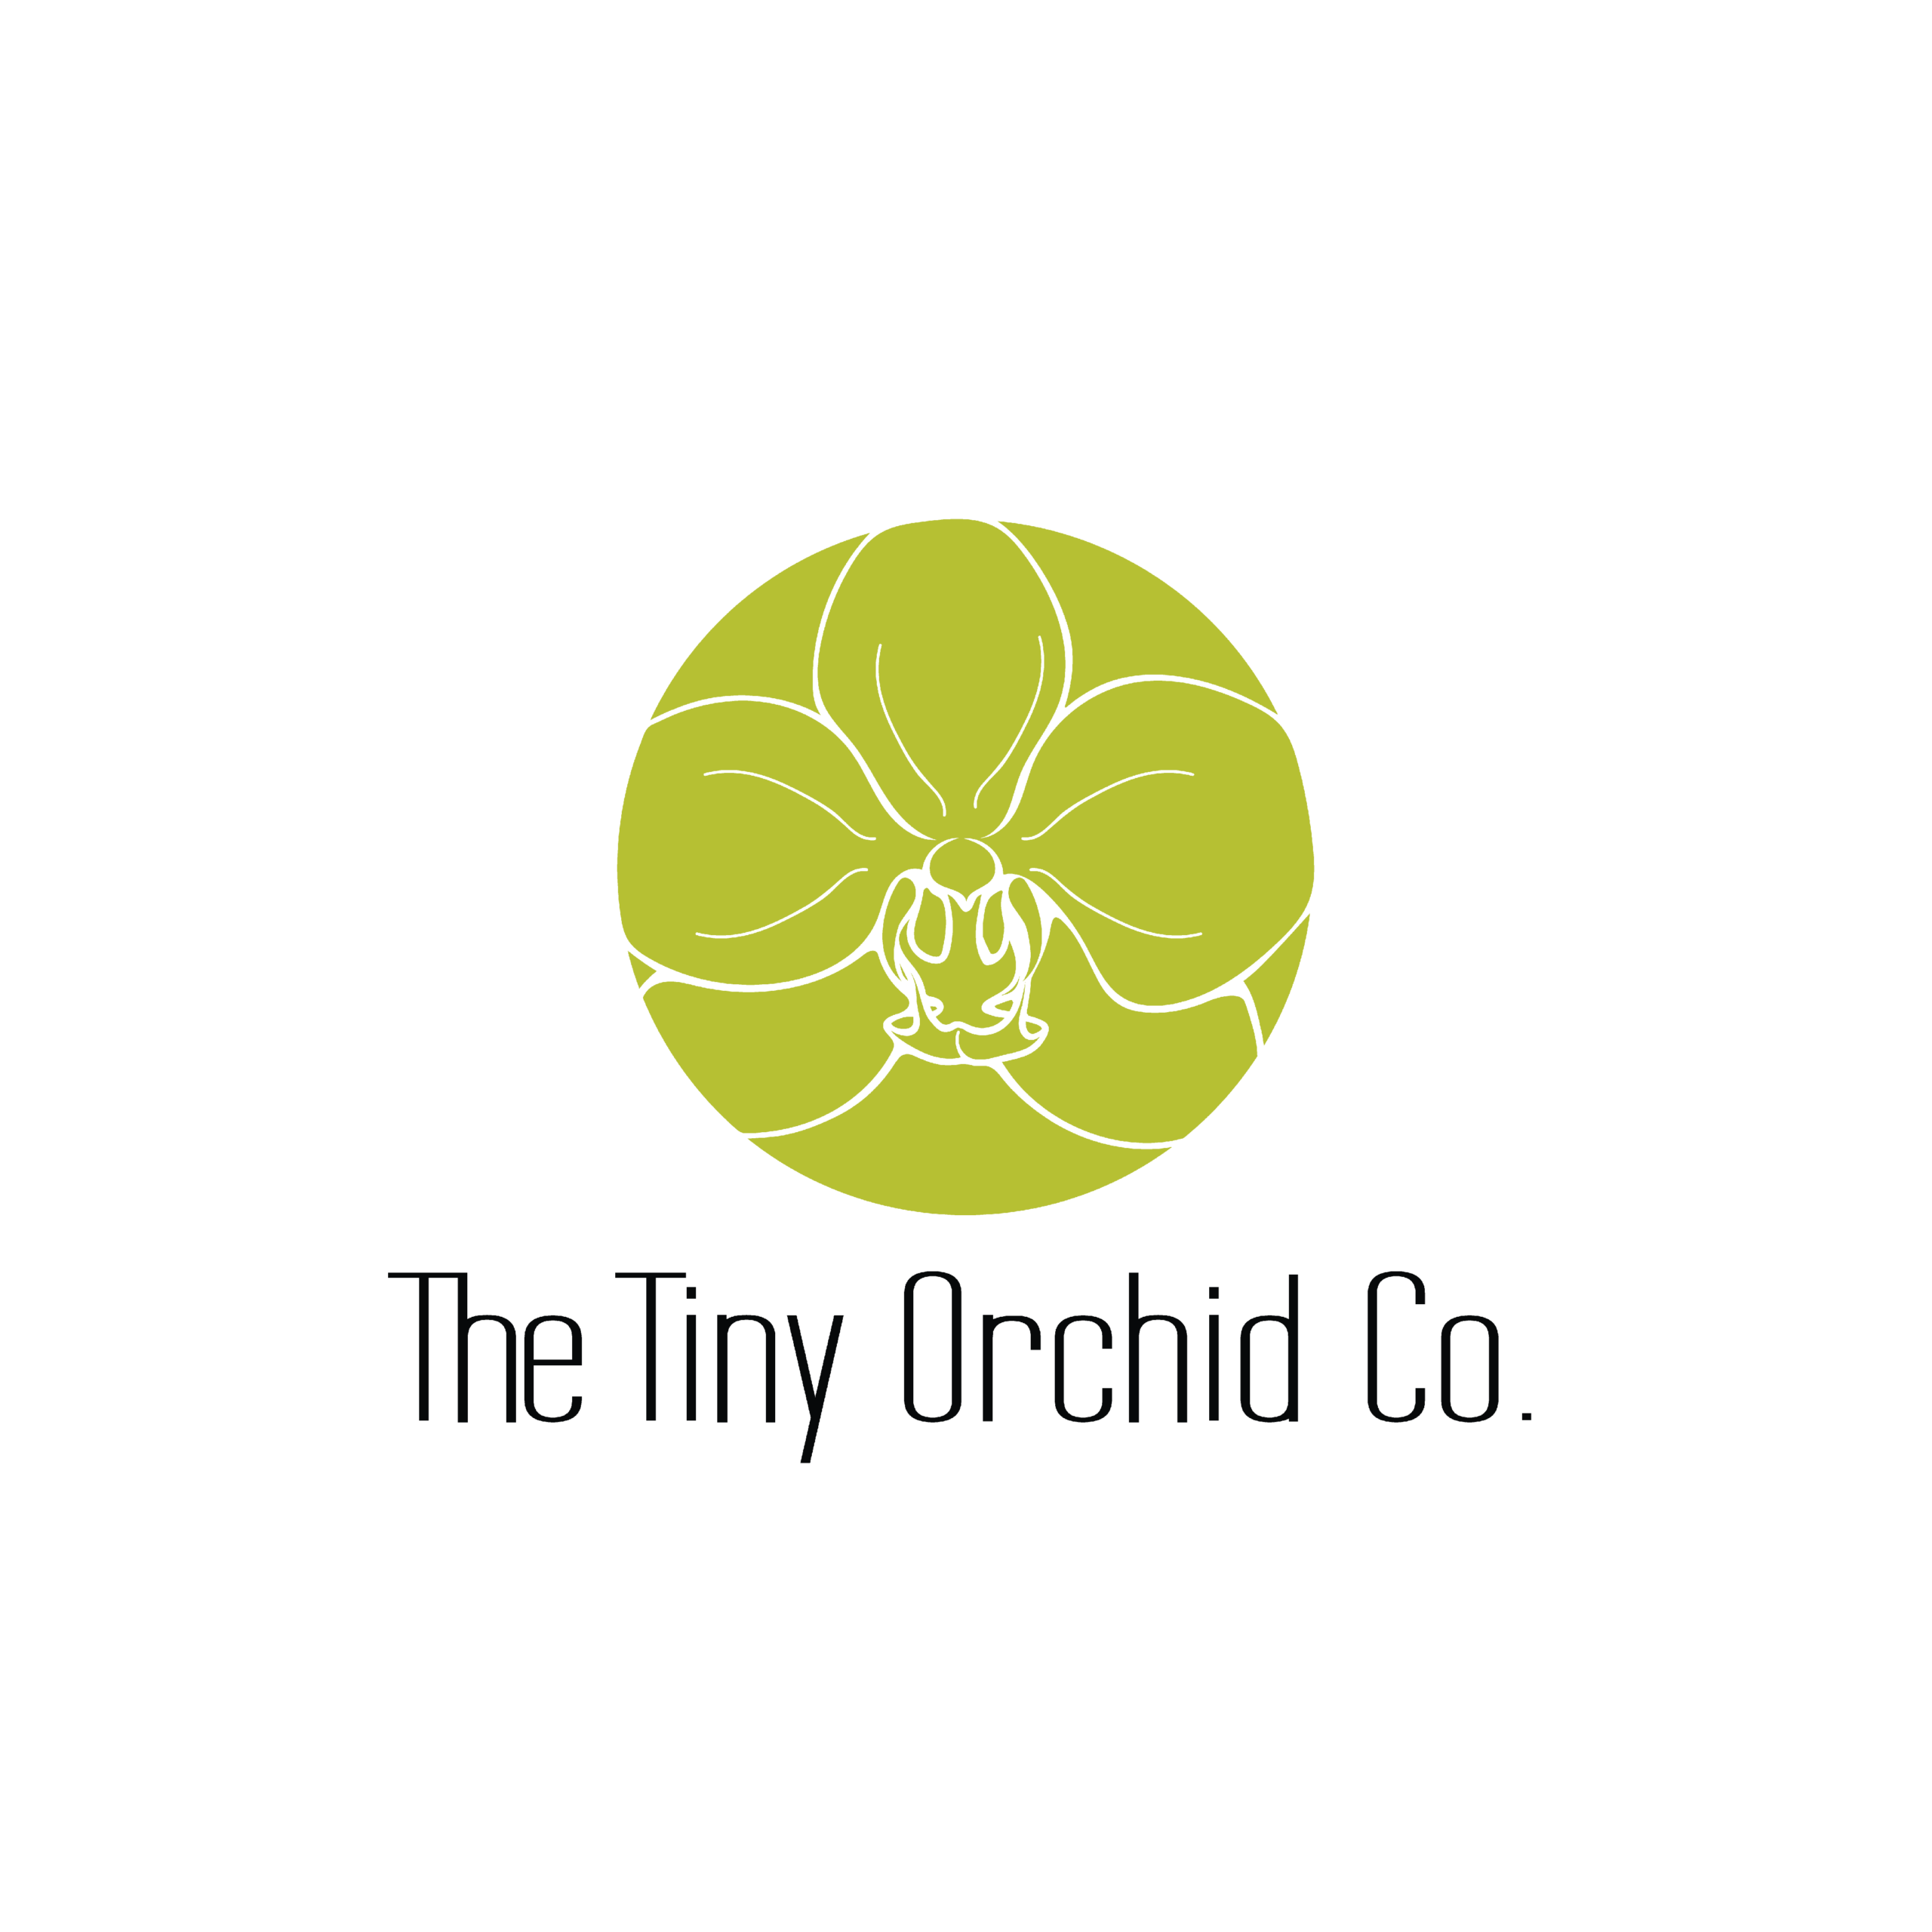 They Tiny Orchid Co. Logo